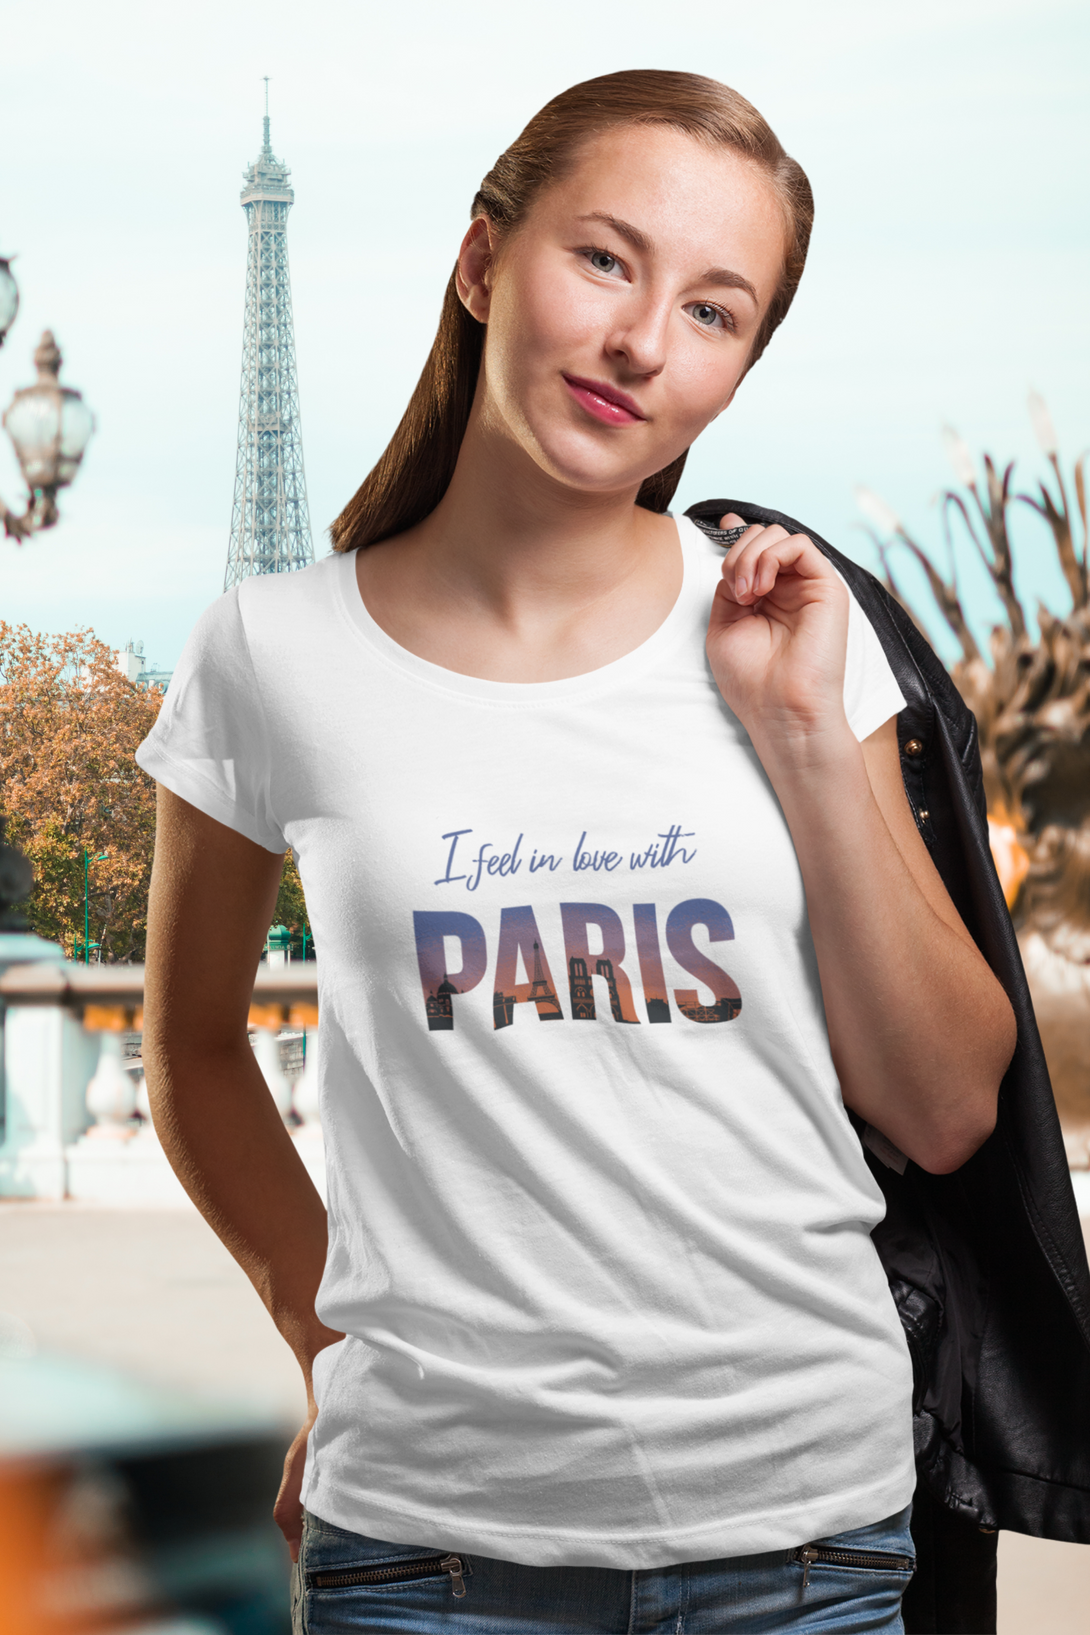 In Love With Paris Printed Scoop Neck T-Shirt For Women - WowWaves - 5